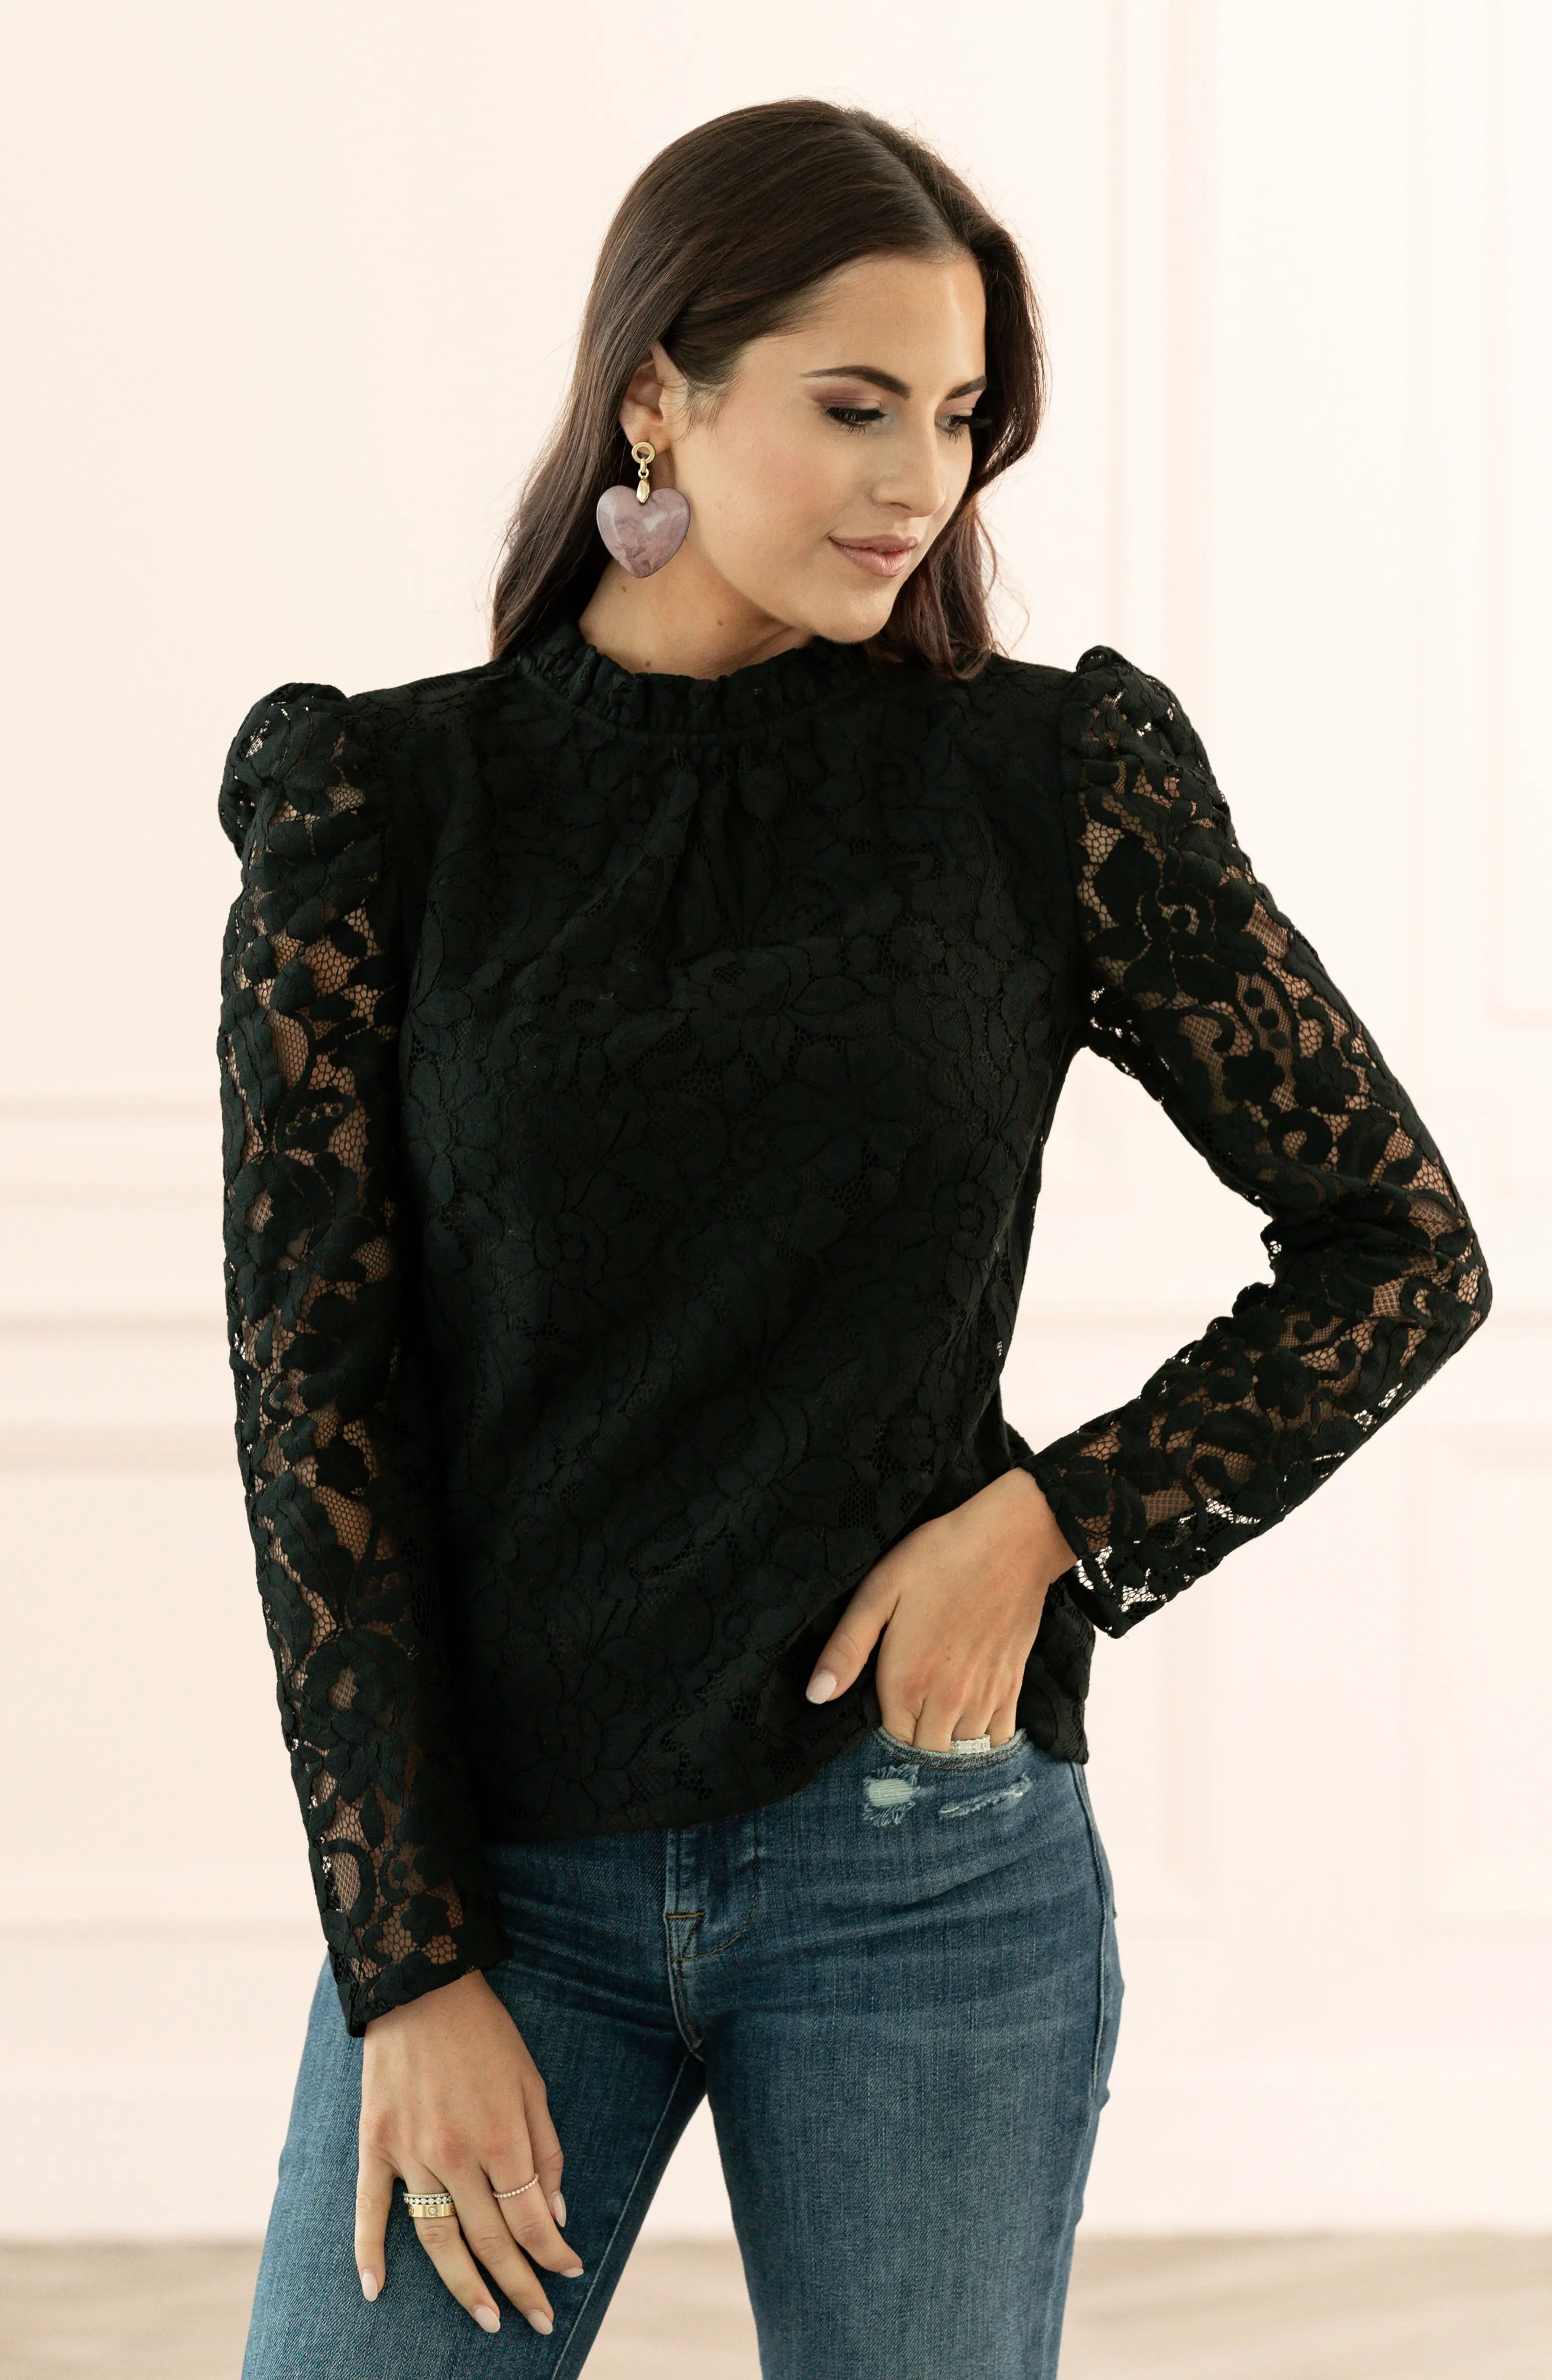 Ruffle Neck Lace Top | Nordstrom